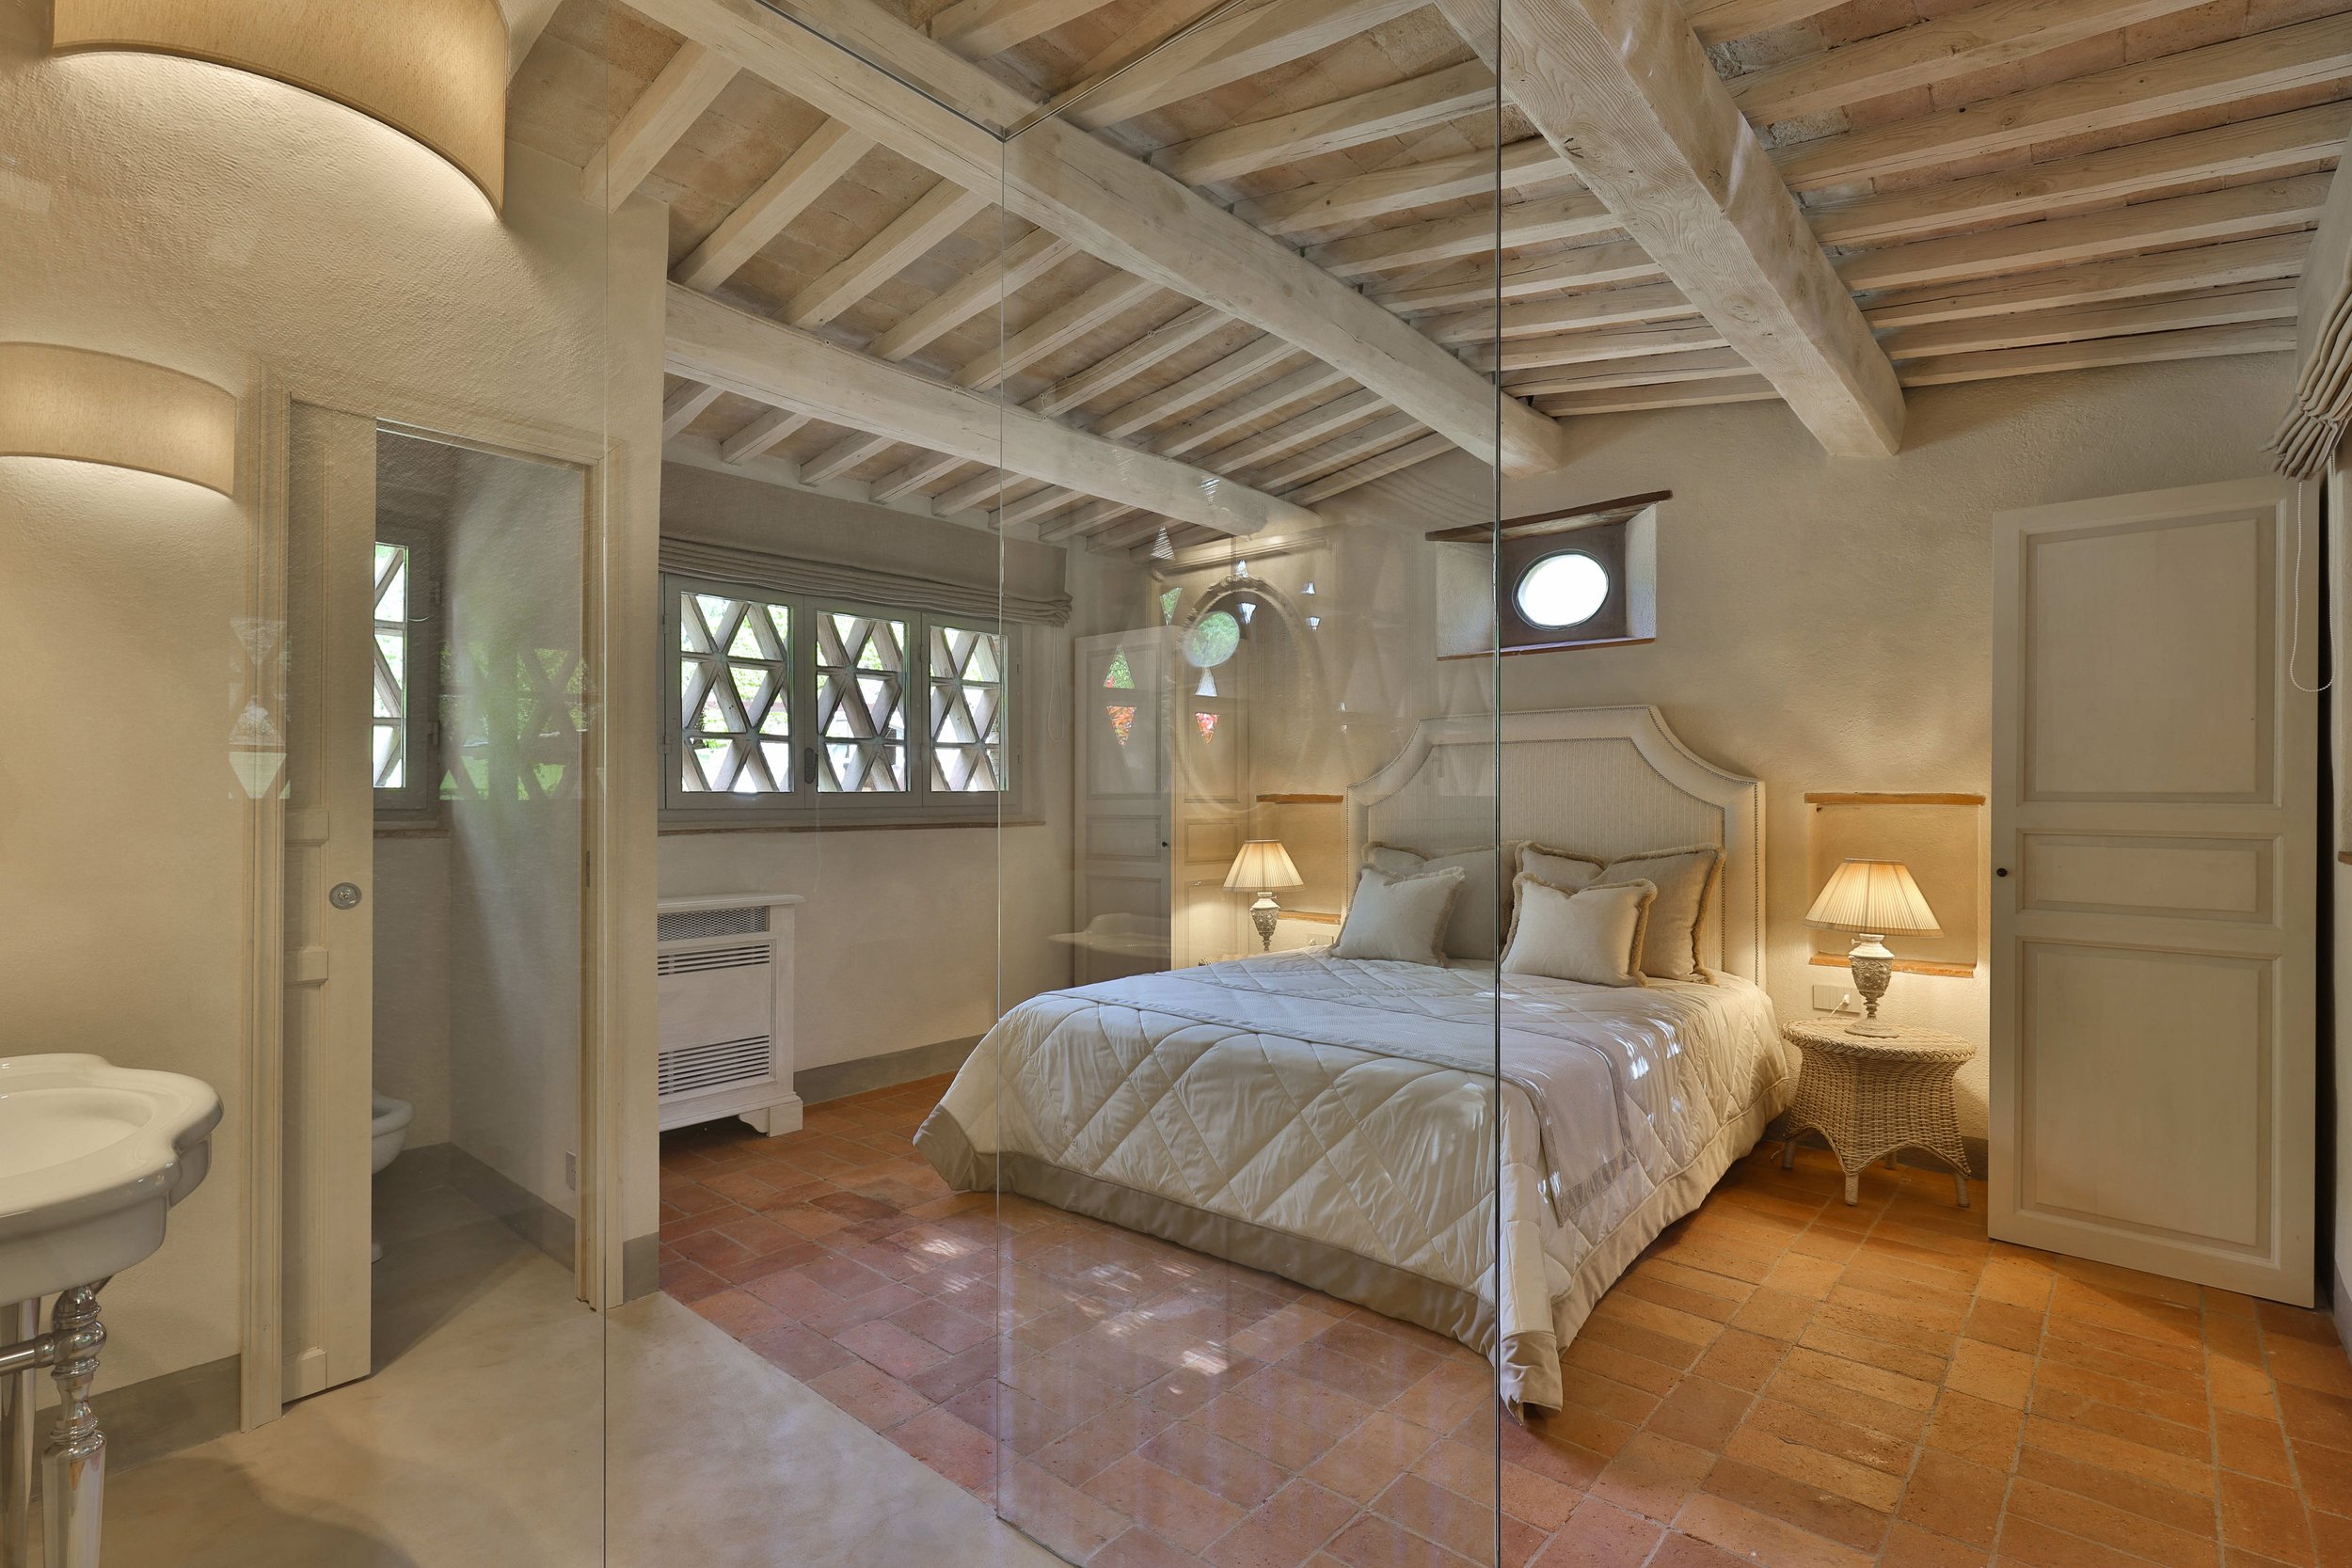 Francis York NEW Luxury Holiday Rental in the Chianti Hills, Tuscany Booking This Summer  28.jpg